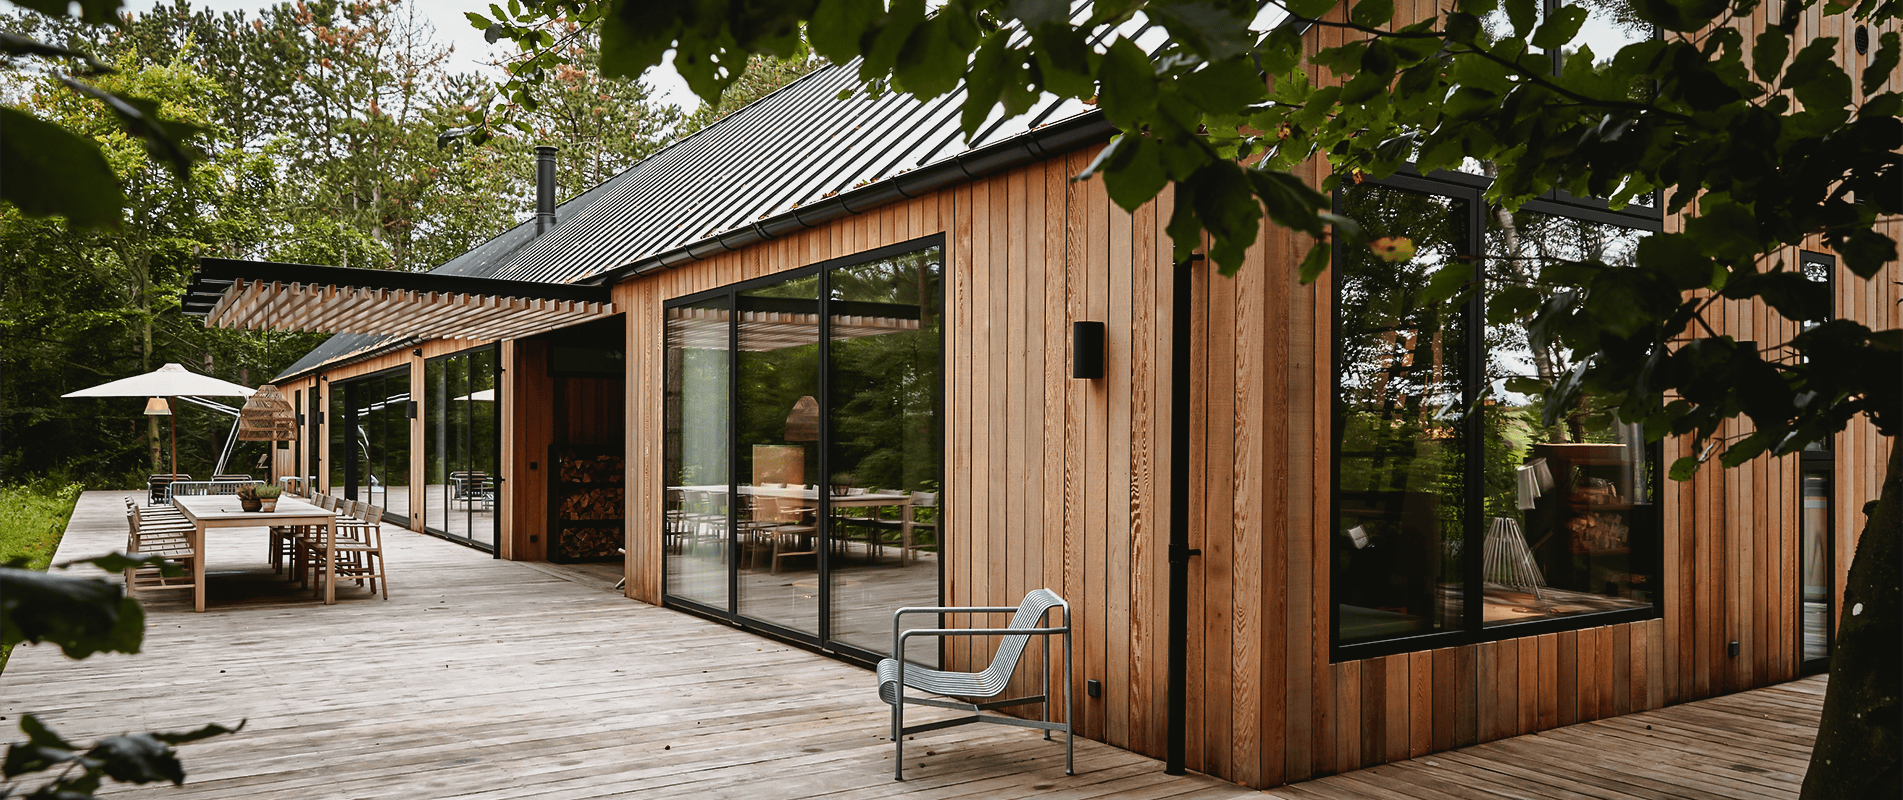 The Nordic Barnhouse Project